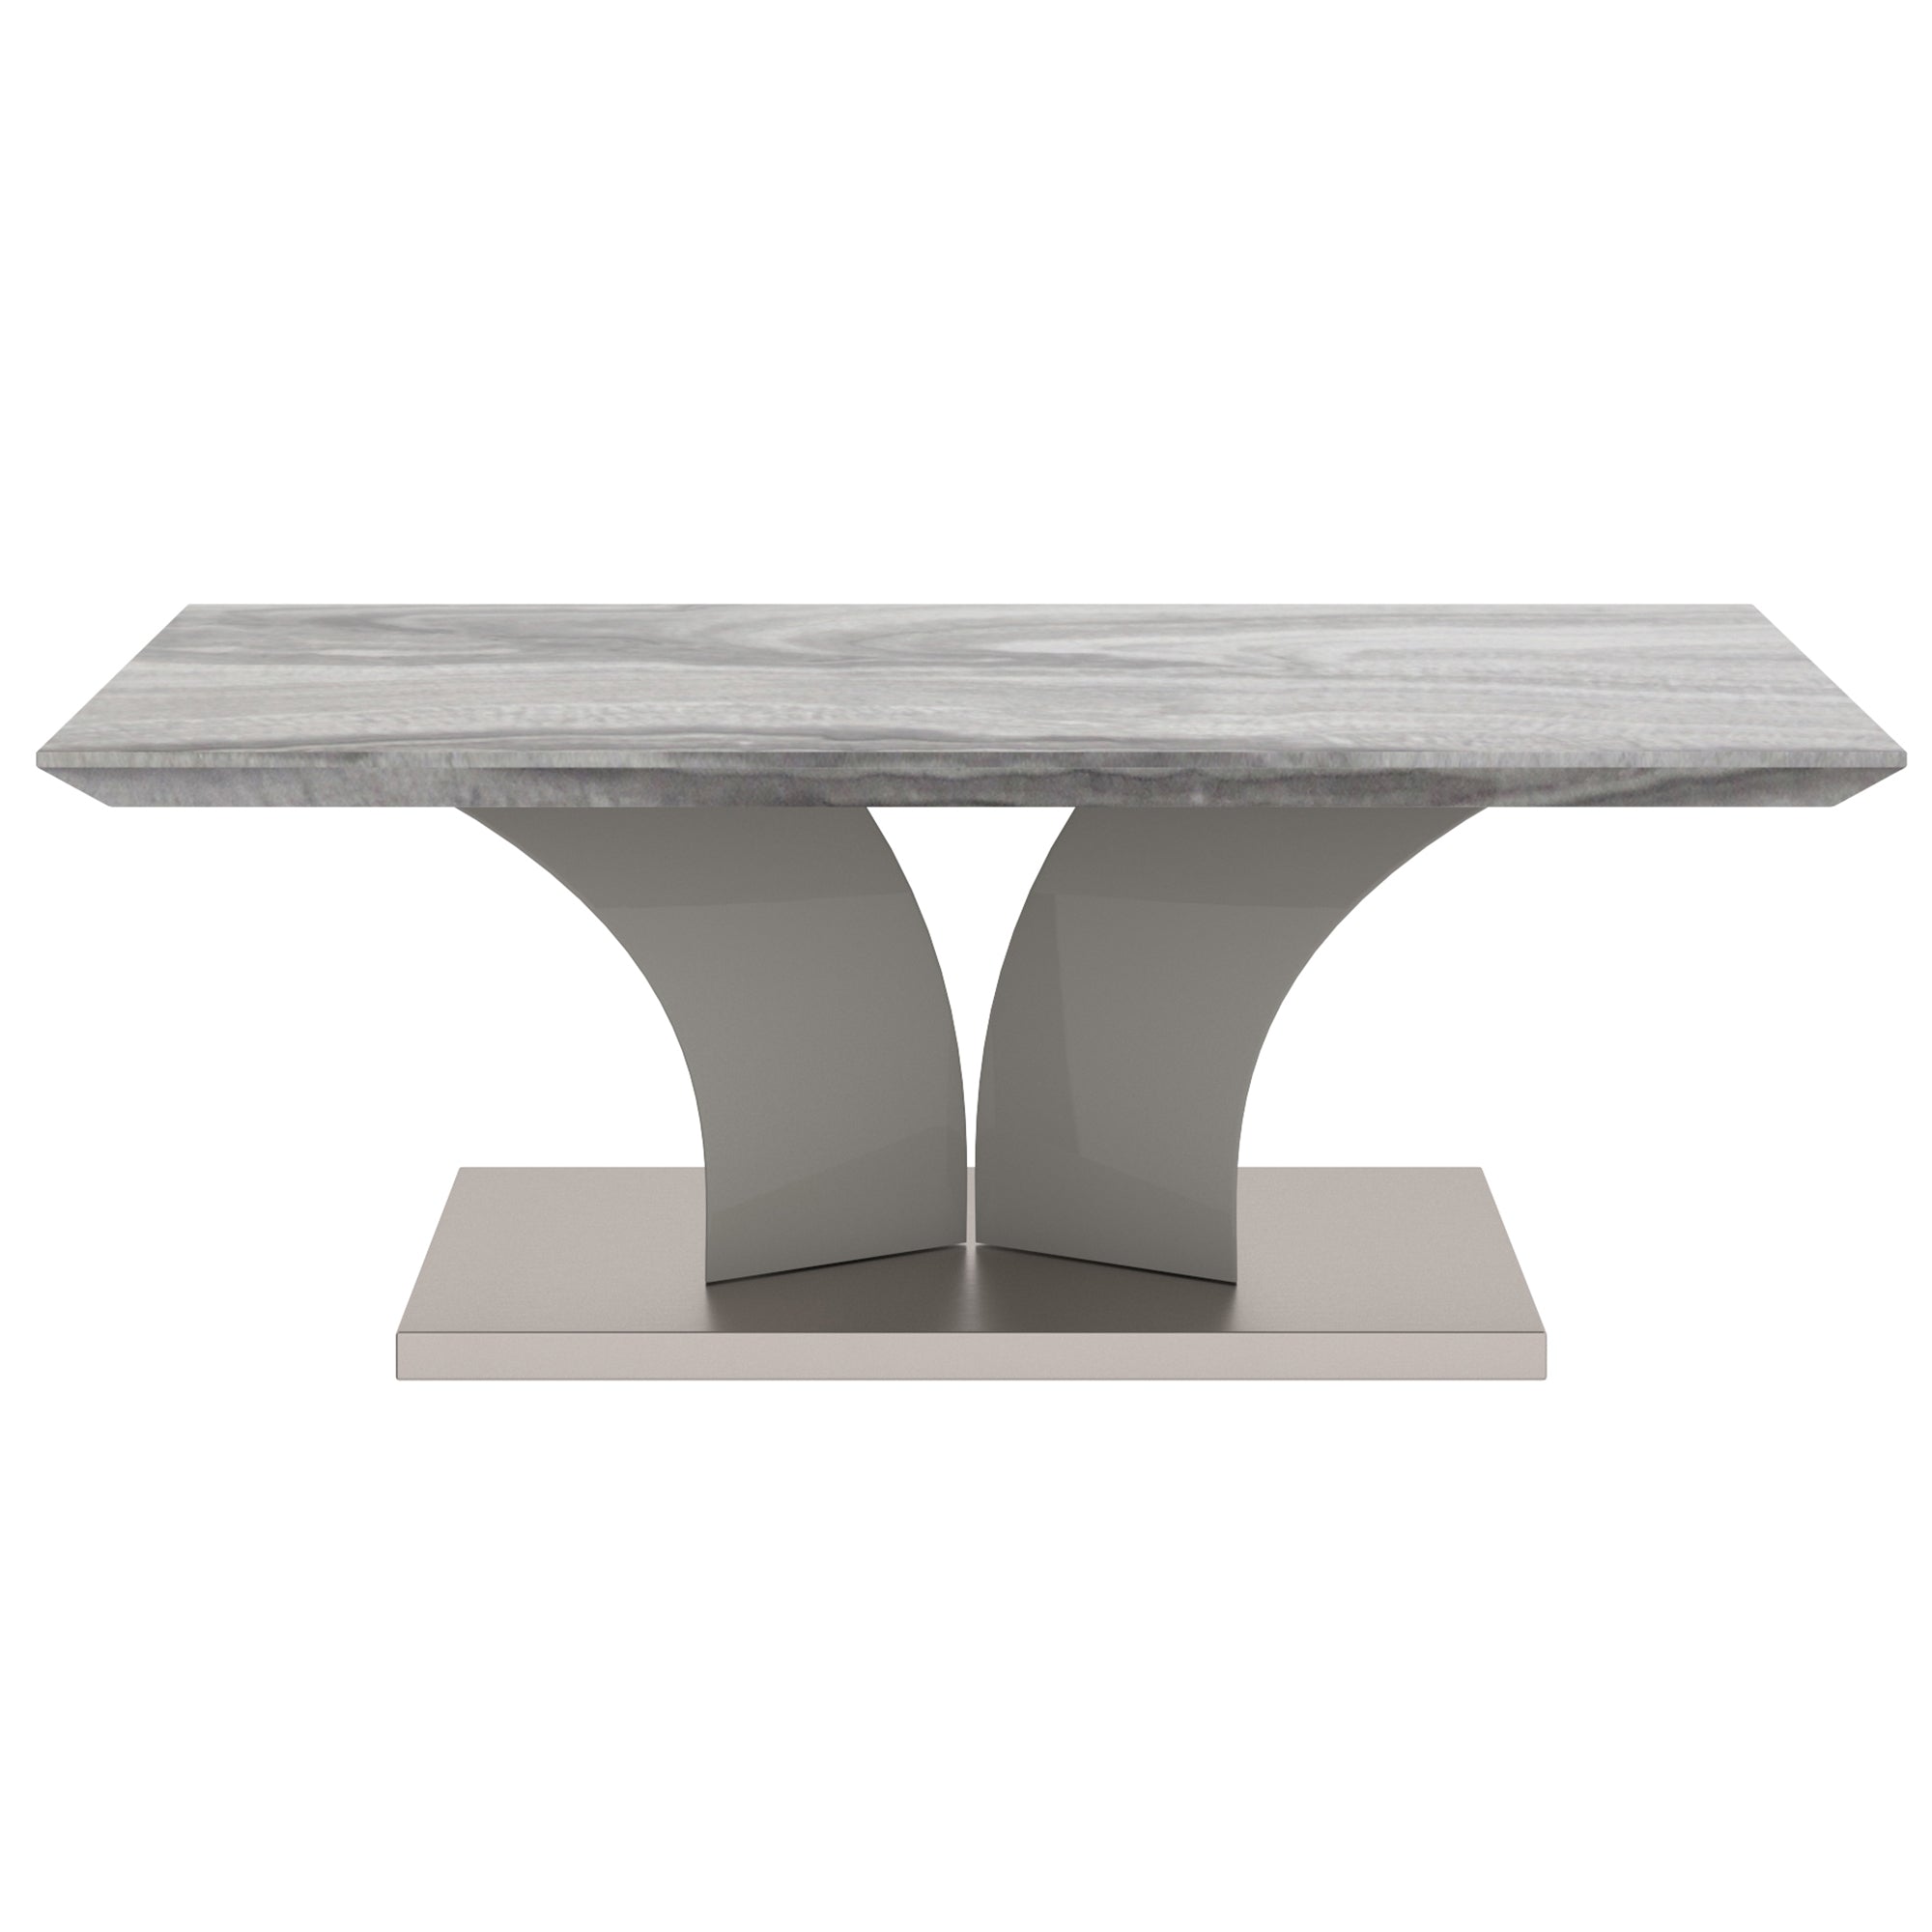 Napoli Coffee Table in Light Grey 301-545GY